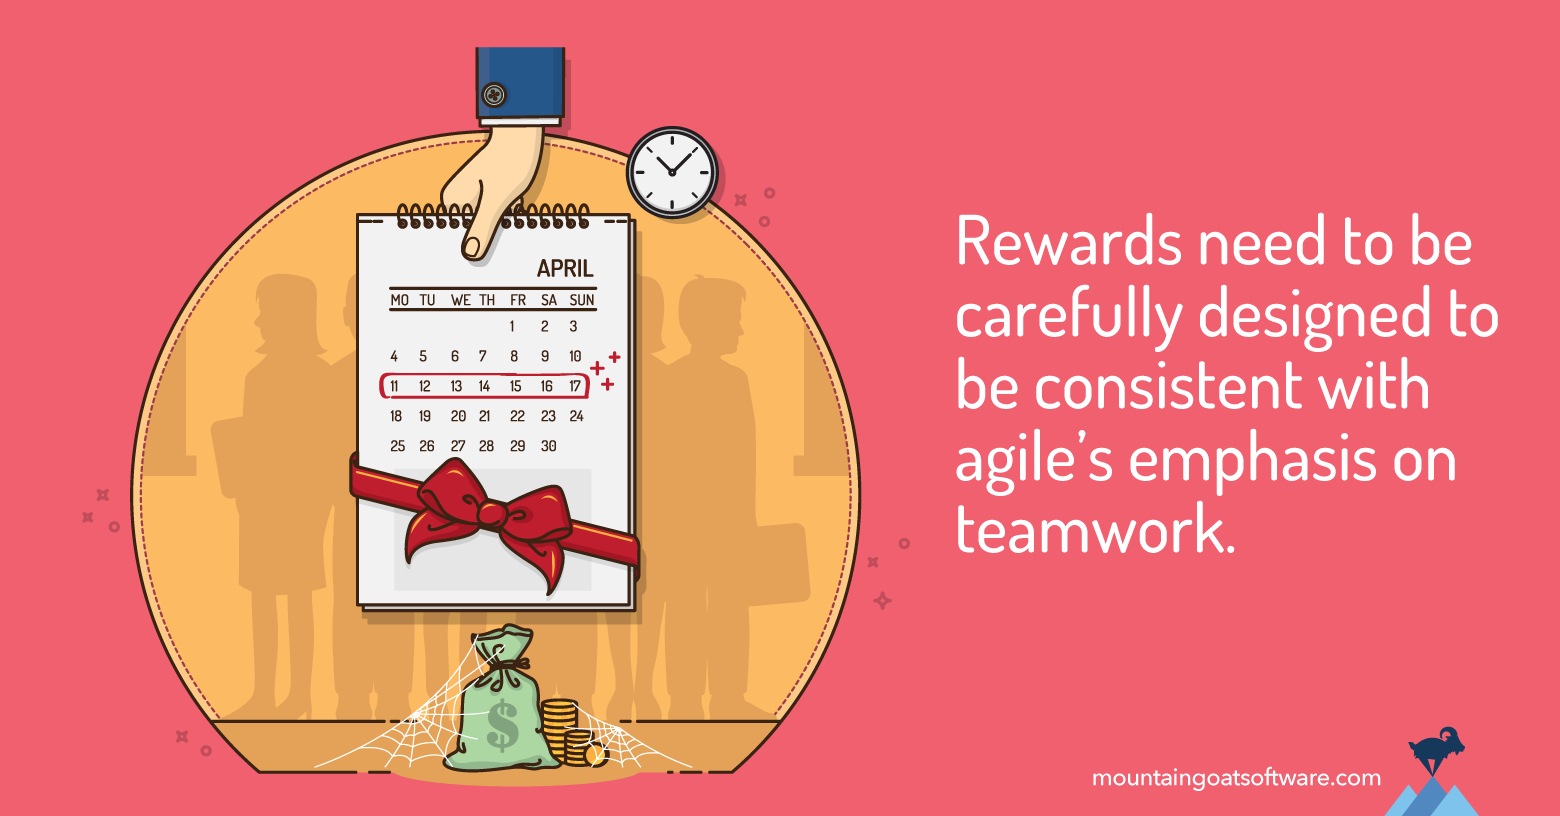 rewarding scrum teams with time, money or days off